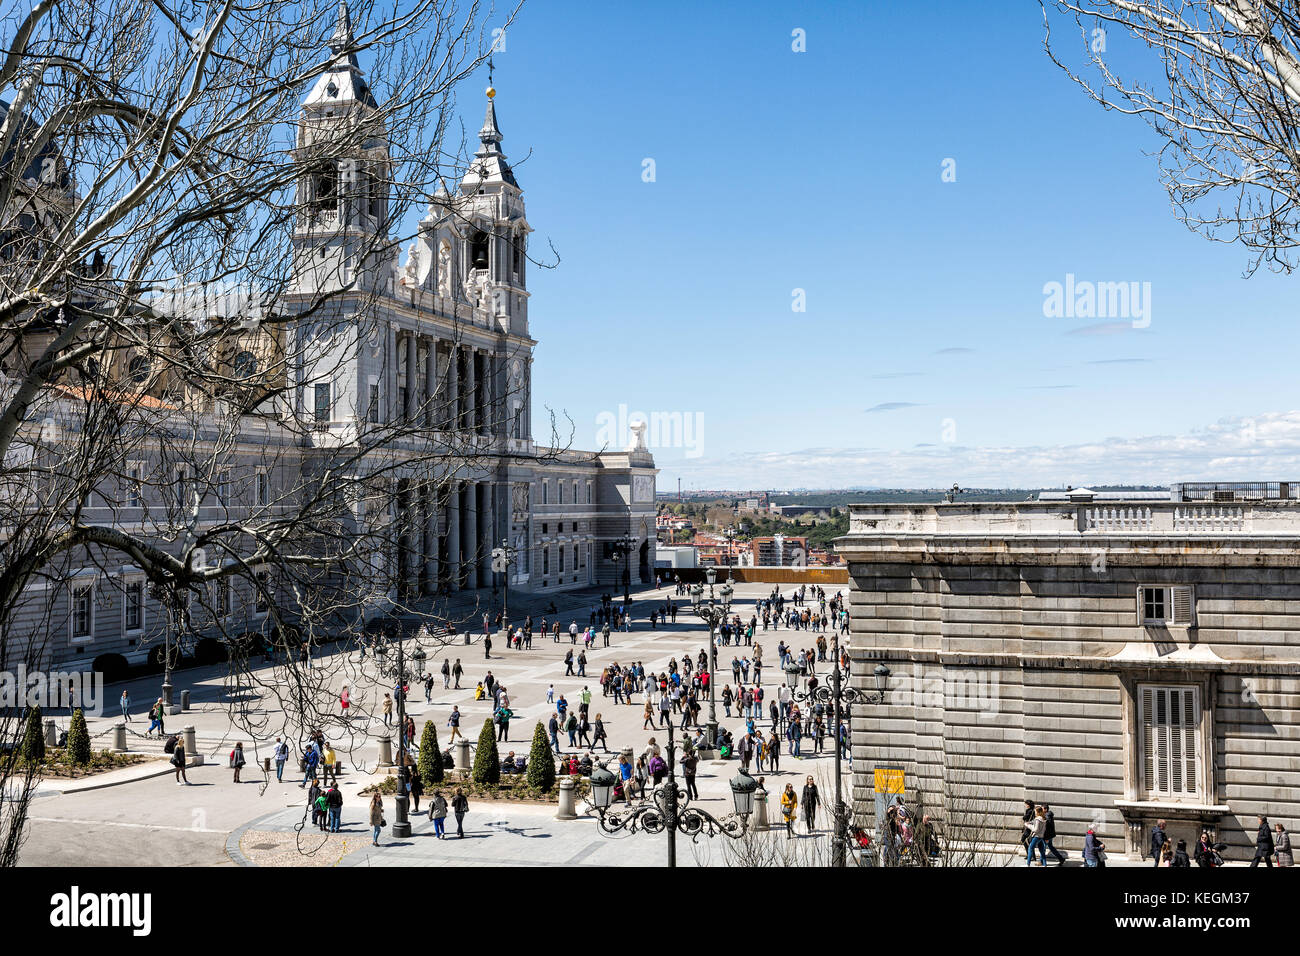 Madrid, SPAIN - april 09, 2016: visitors walking in Almudena square between  Almudena Cathedral  and Royal Palace, on April 09, 2016 in Madrid, Spain Stock Photo